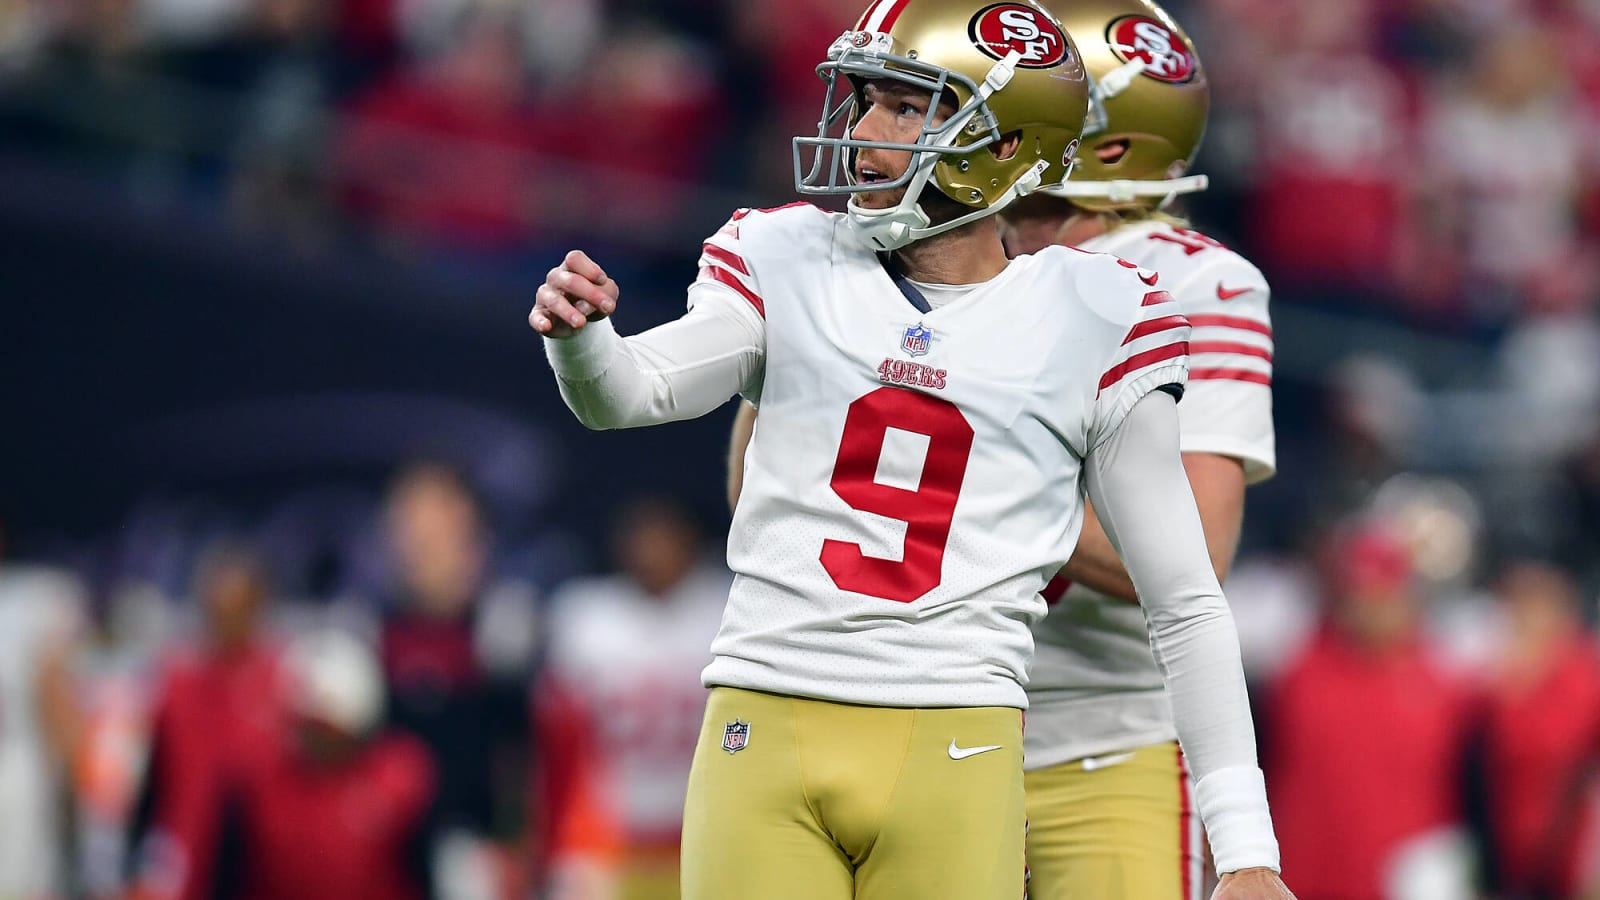 "I want to win a Super Bowl": Former 49ers kicker Robbie Gould still seeks NFL home